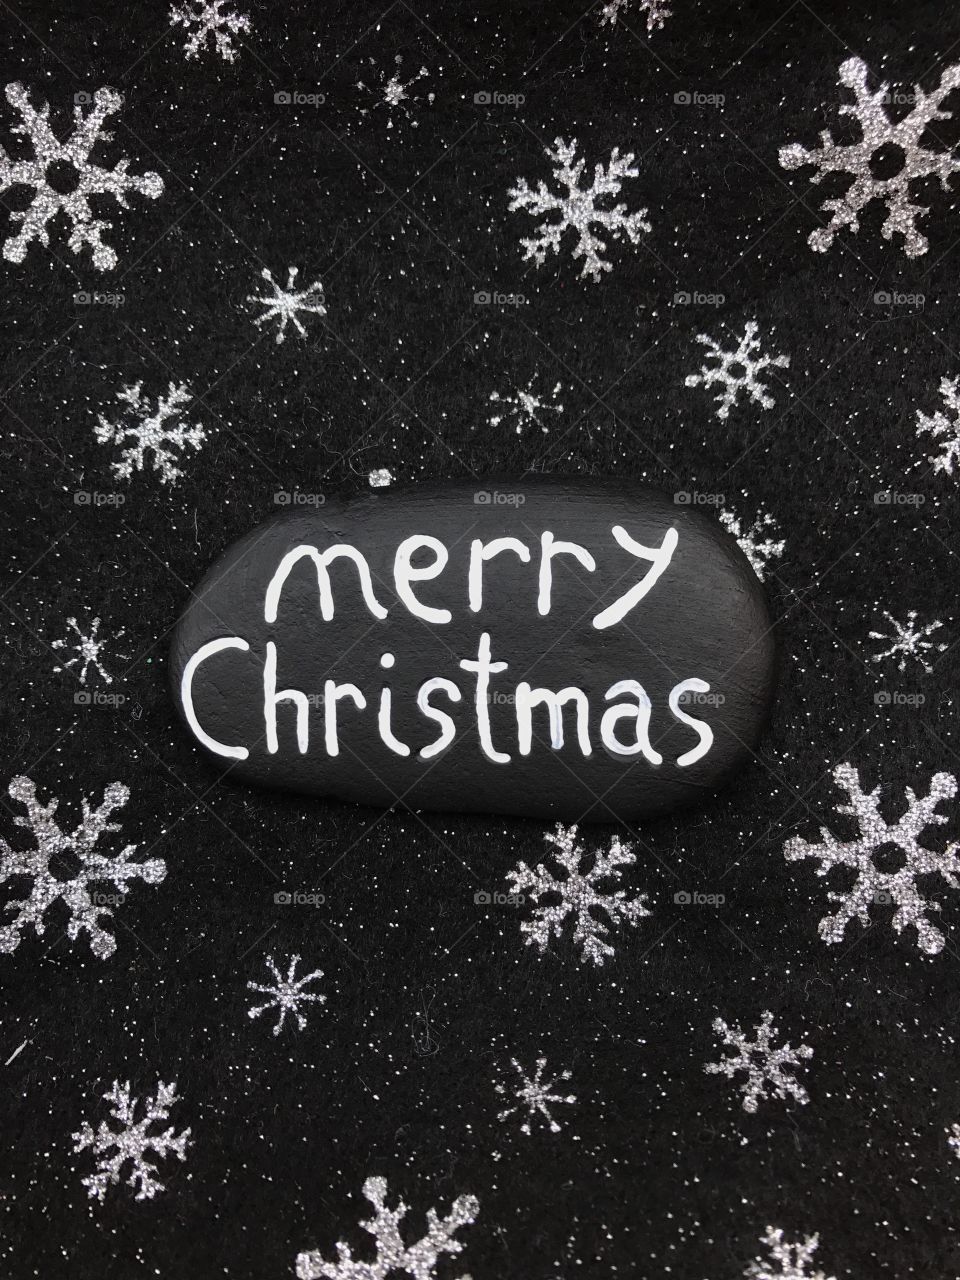 Merry Christmas on a black painted stone